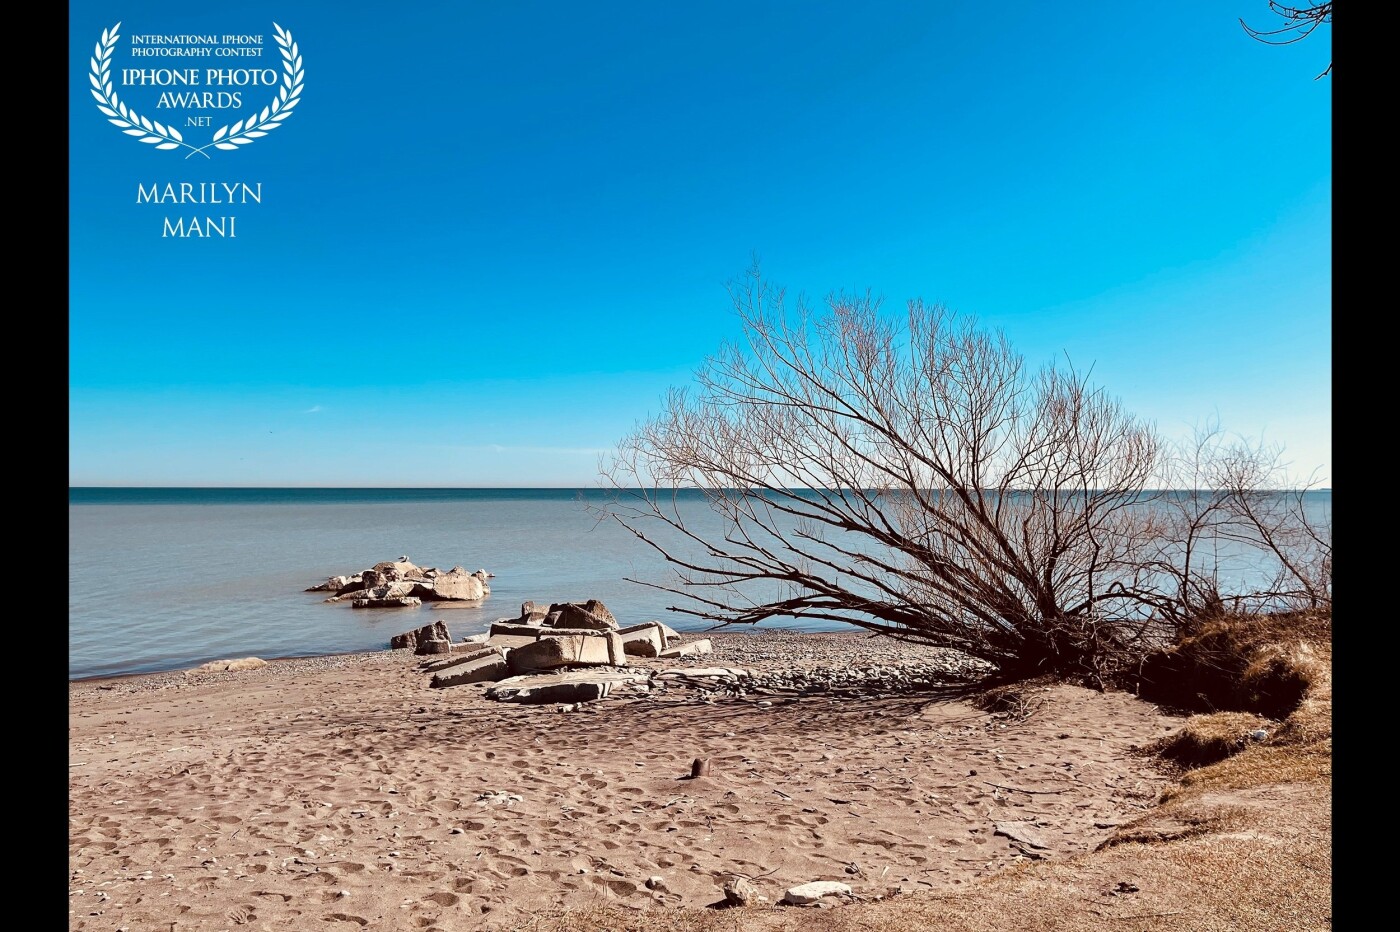 A tranquil moment by the lake on a sunny spring day in Hamilton, Ontario. The bare tree against the stunning blue sky and lake is simply majestic! 